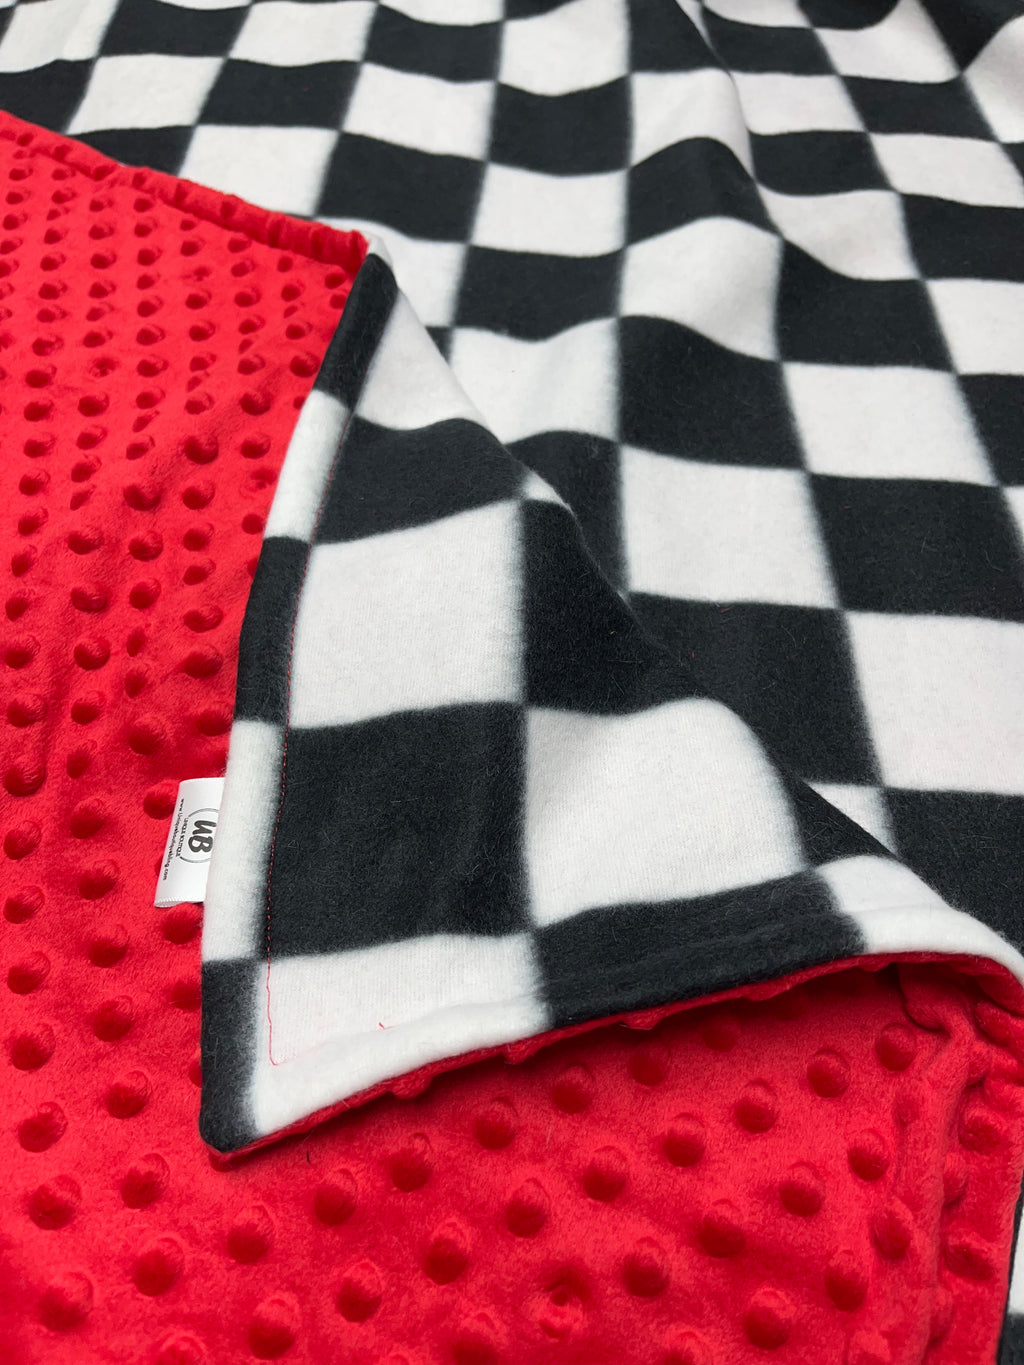 Checkered Plaid Blanket w/Red Cuddle Dimple Dot Minky